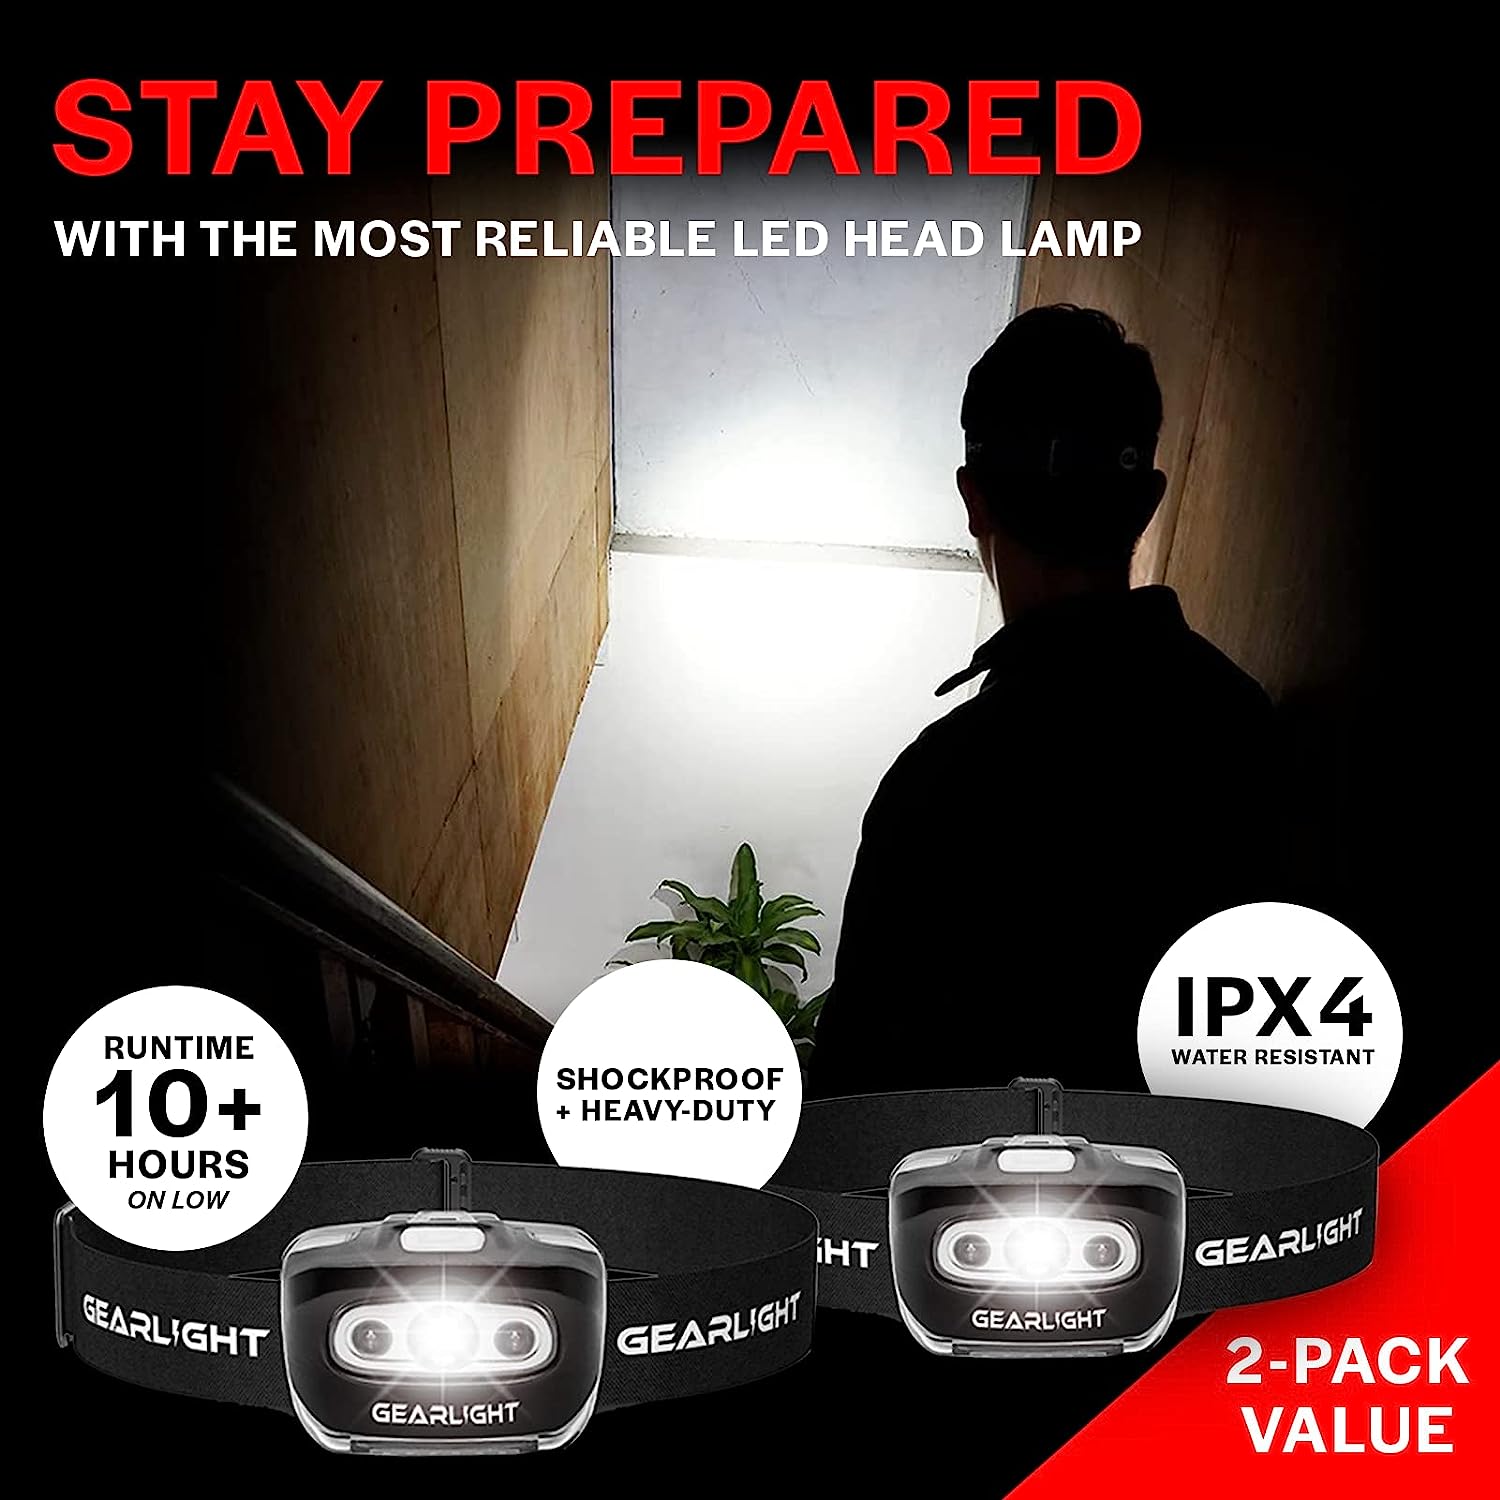 LED Headlamp for Outdoor Adventures Versatile and Durable